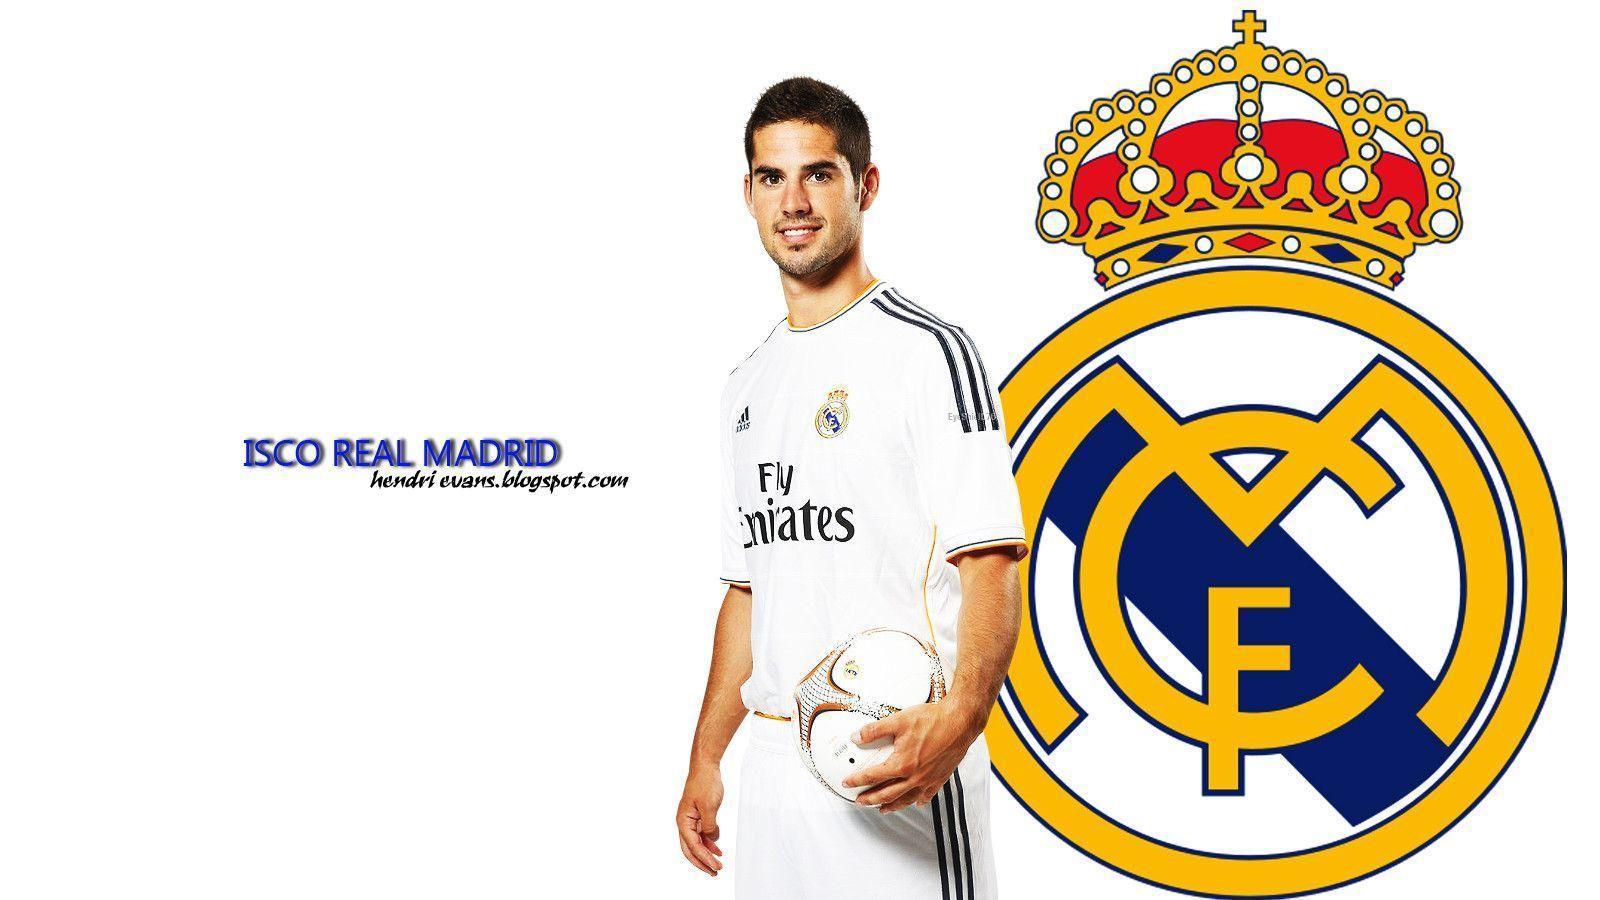 Isco with Real Madrid team logo image for wallpaper